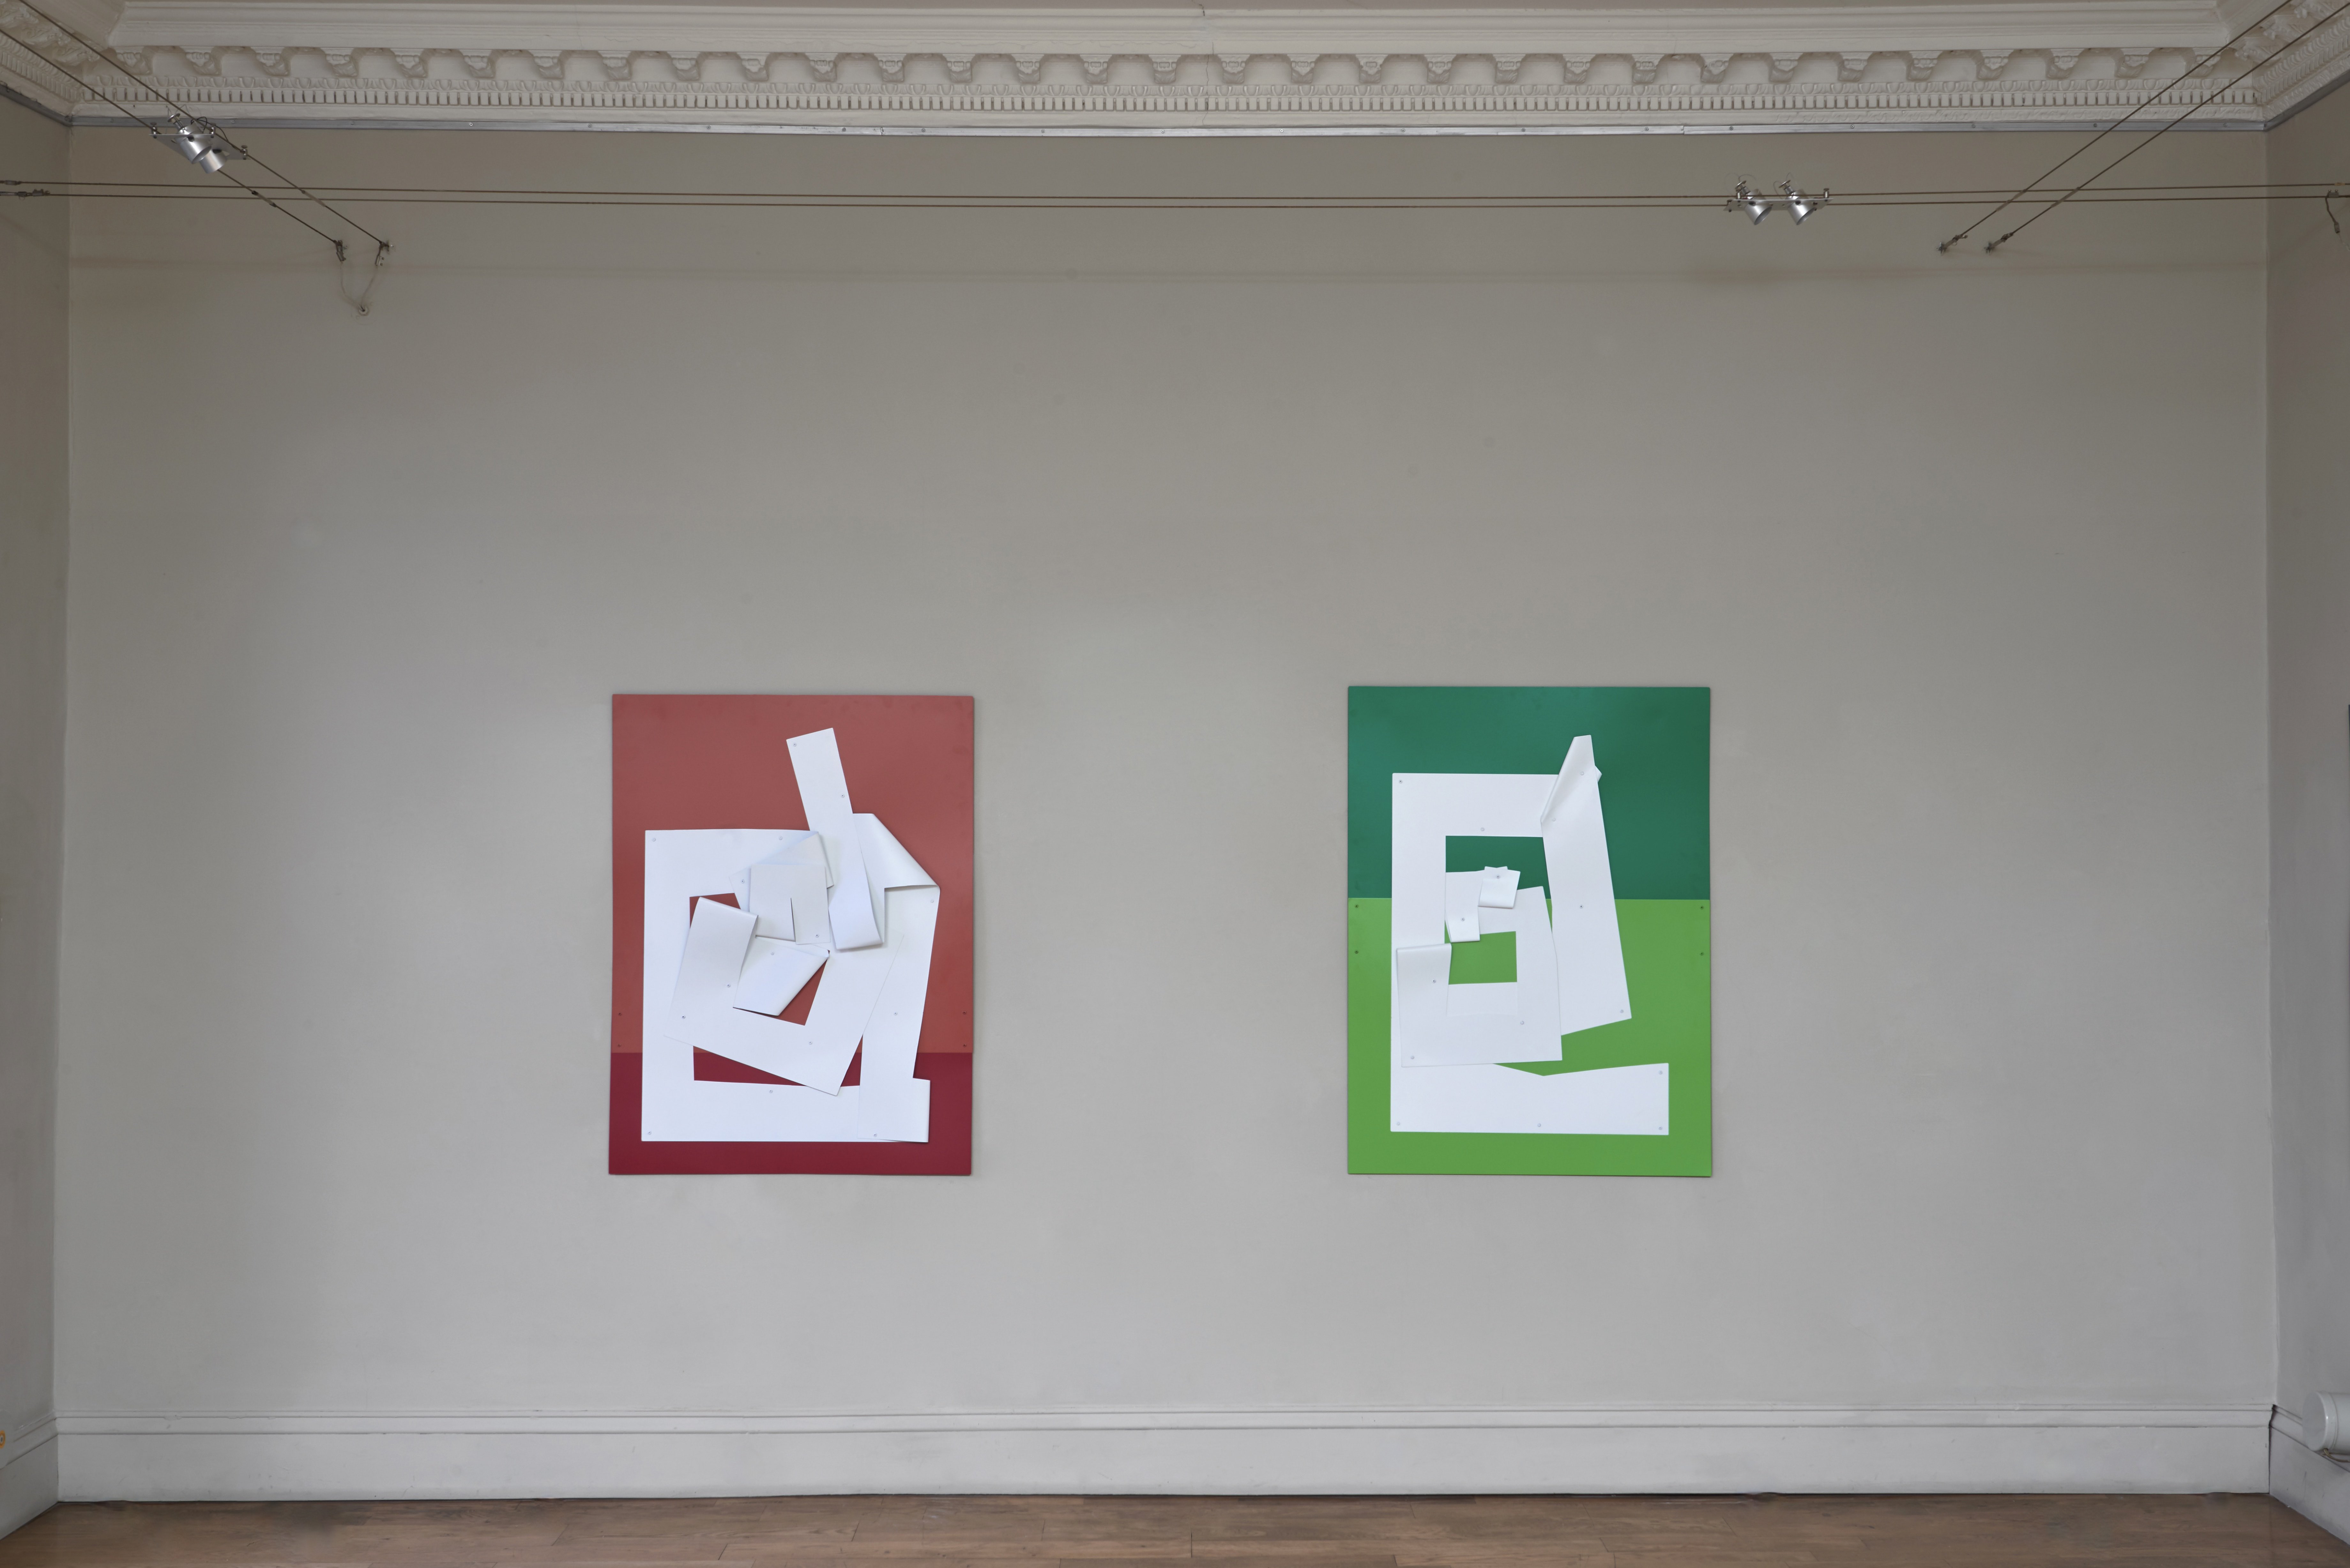 Neil Zakiewicz, from left to right: 'Traversal 9' 121×90×5cm; 'Traversal 7' 122×90×1cm; both: spray paint on steel, 2022, installation photo by Andy Keate